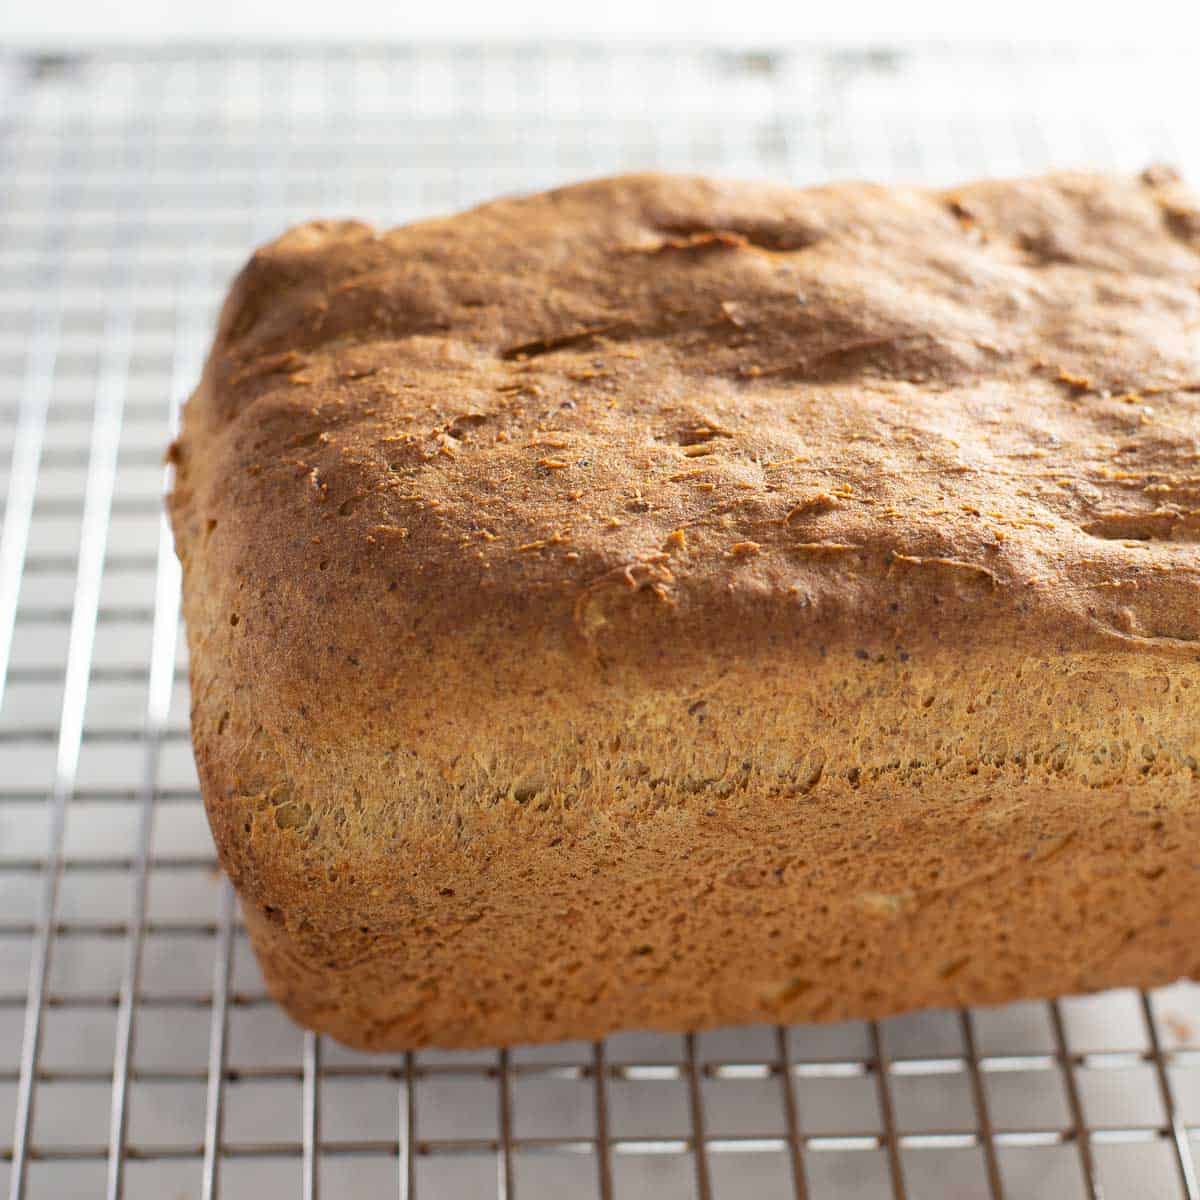 Easy Gluten Free Bread Recipe That Anyone Can Make